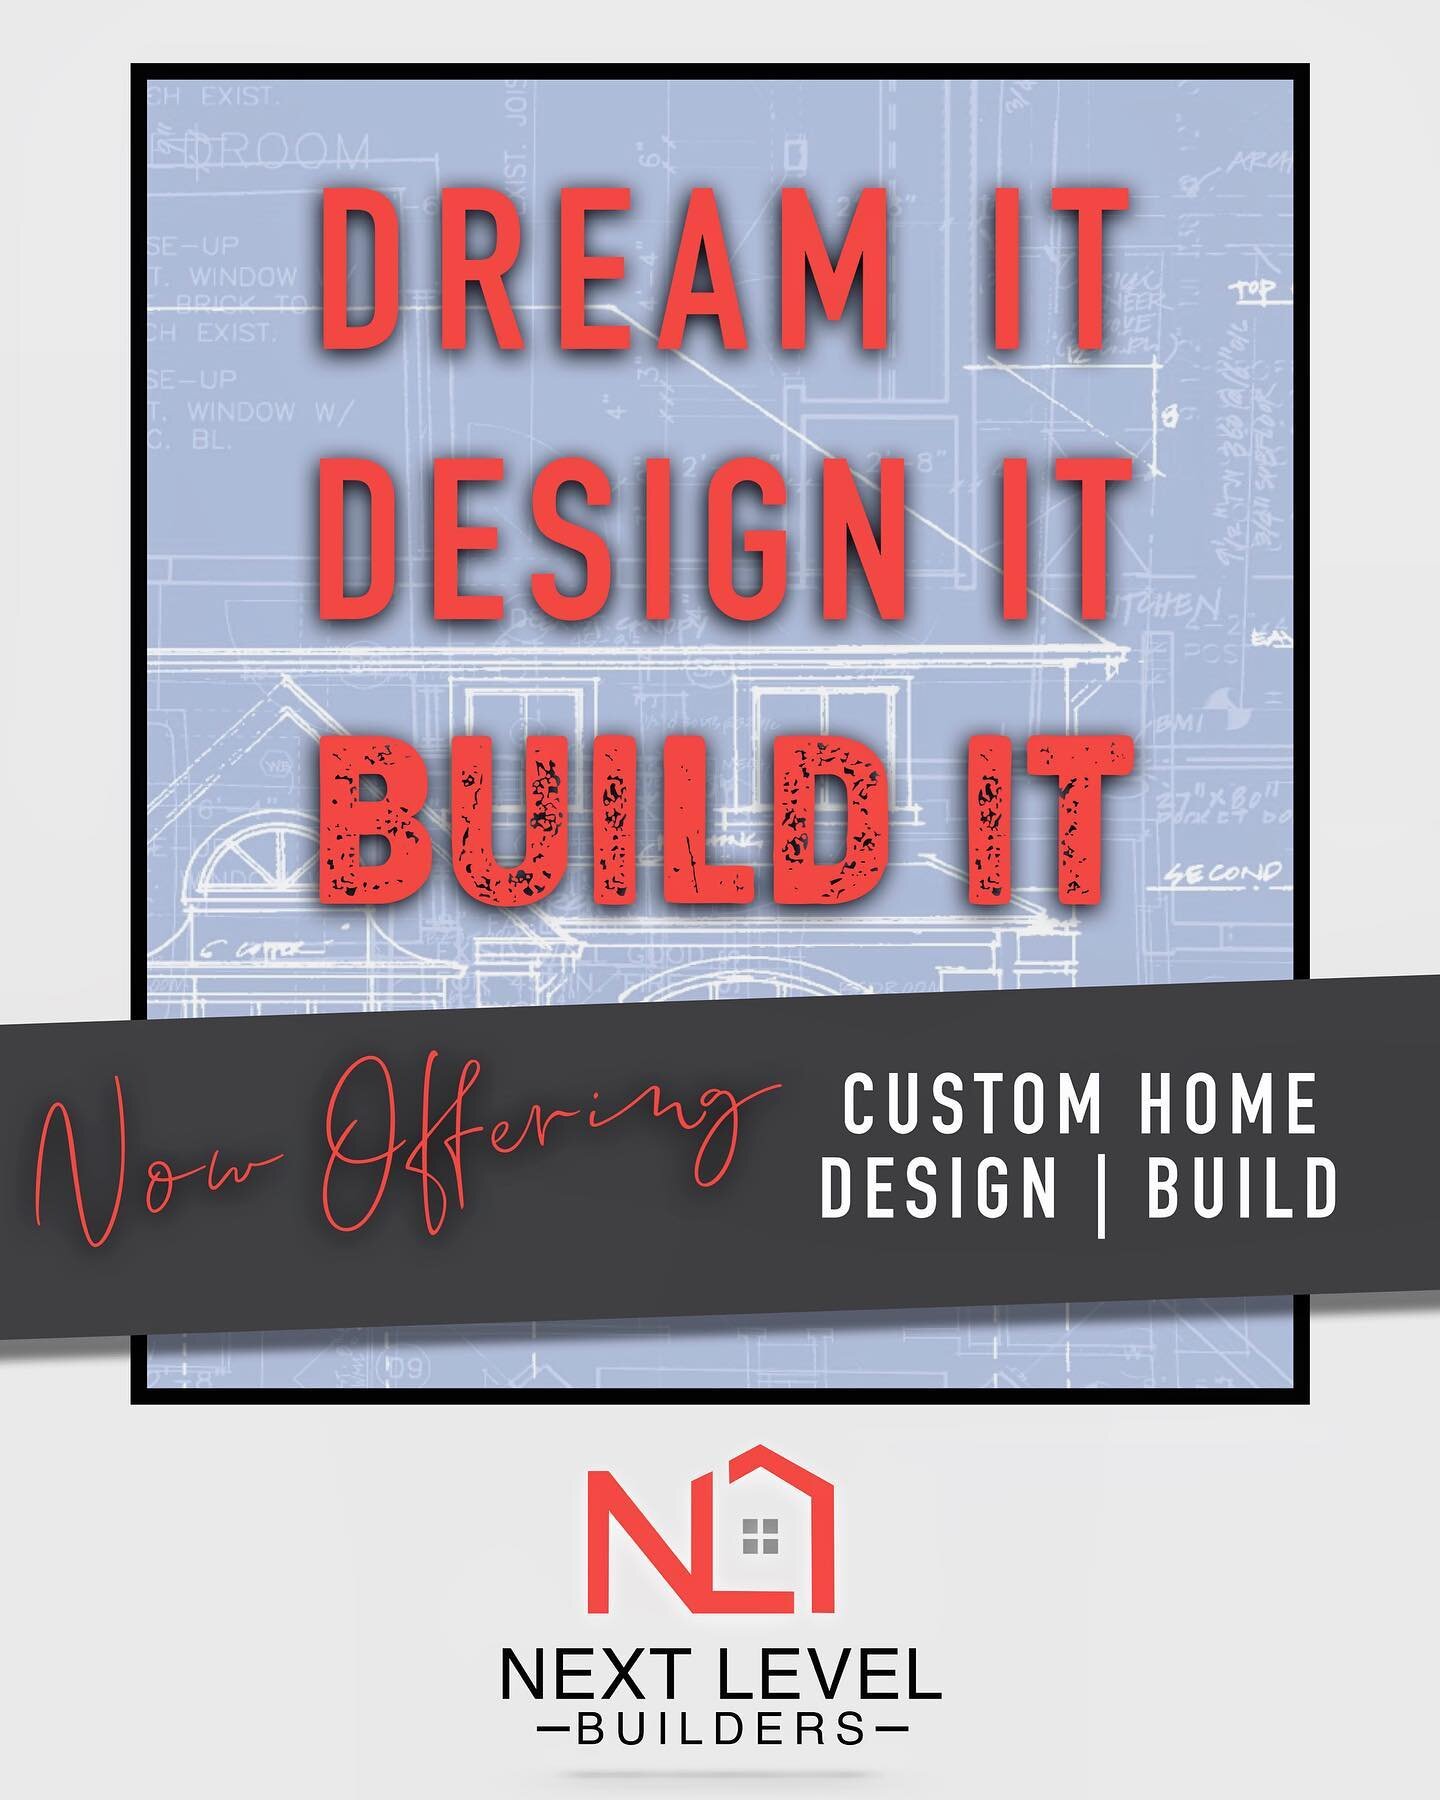 Call us today to discuss turning your dream into a reality!

#dreamhome #builder #craftsmanhome #customhome